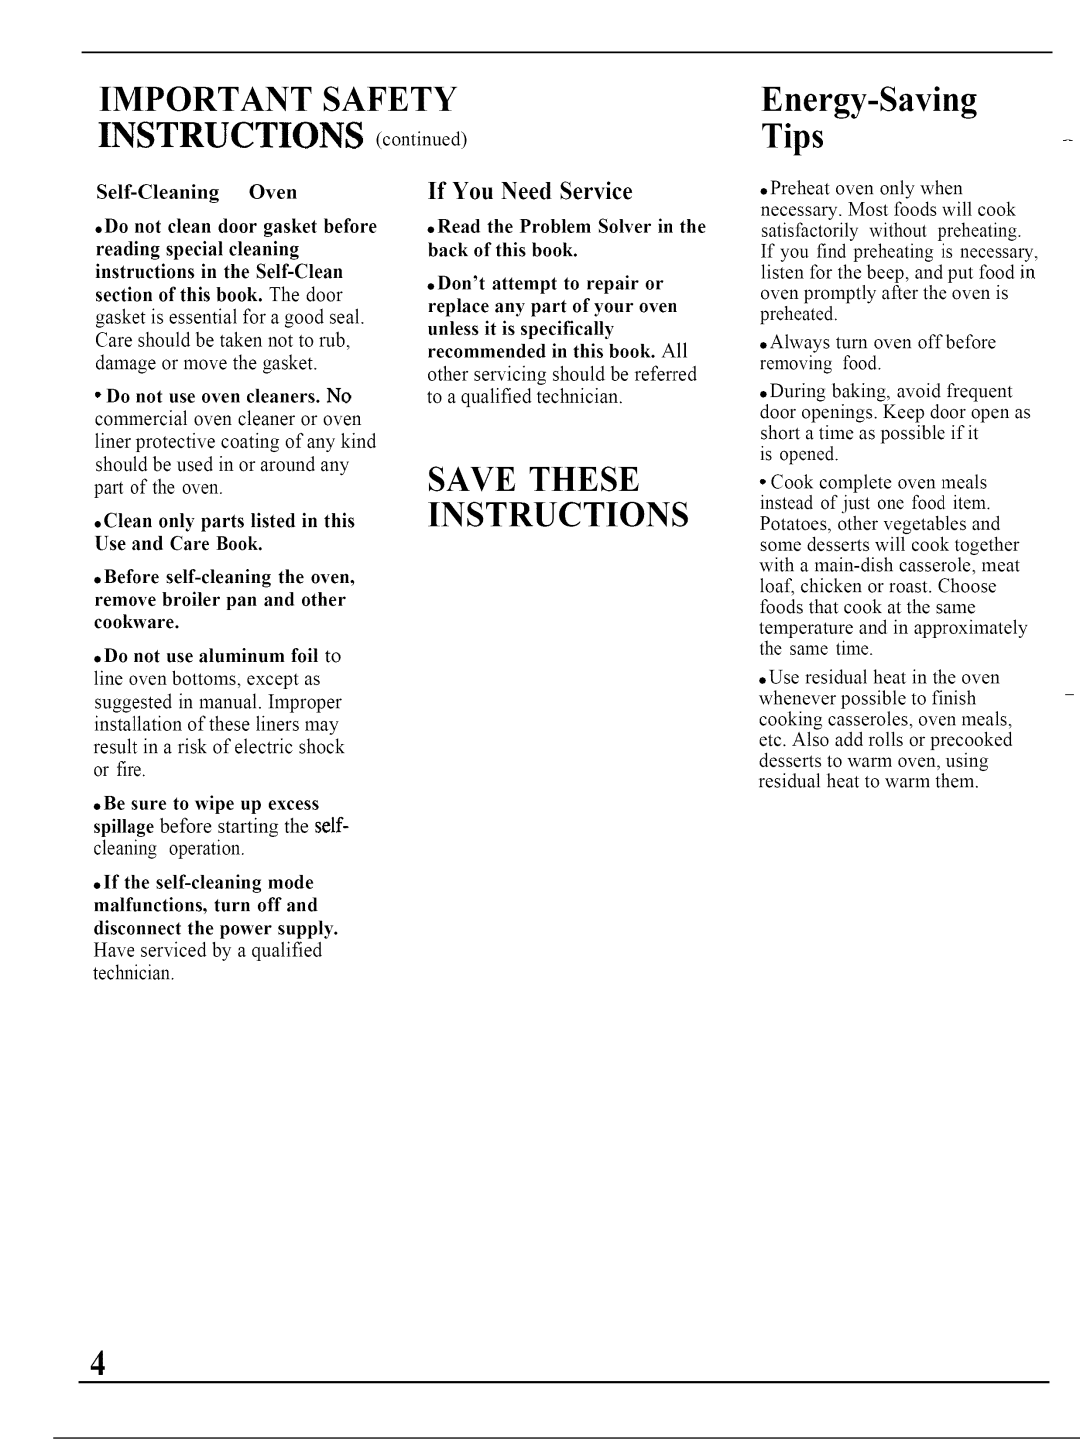 GE JKP45WP Important Safety, INSTRUCTIONS continued, Save These Instructions, If You Need Service, Energy-SavingTips 